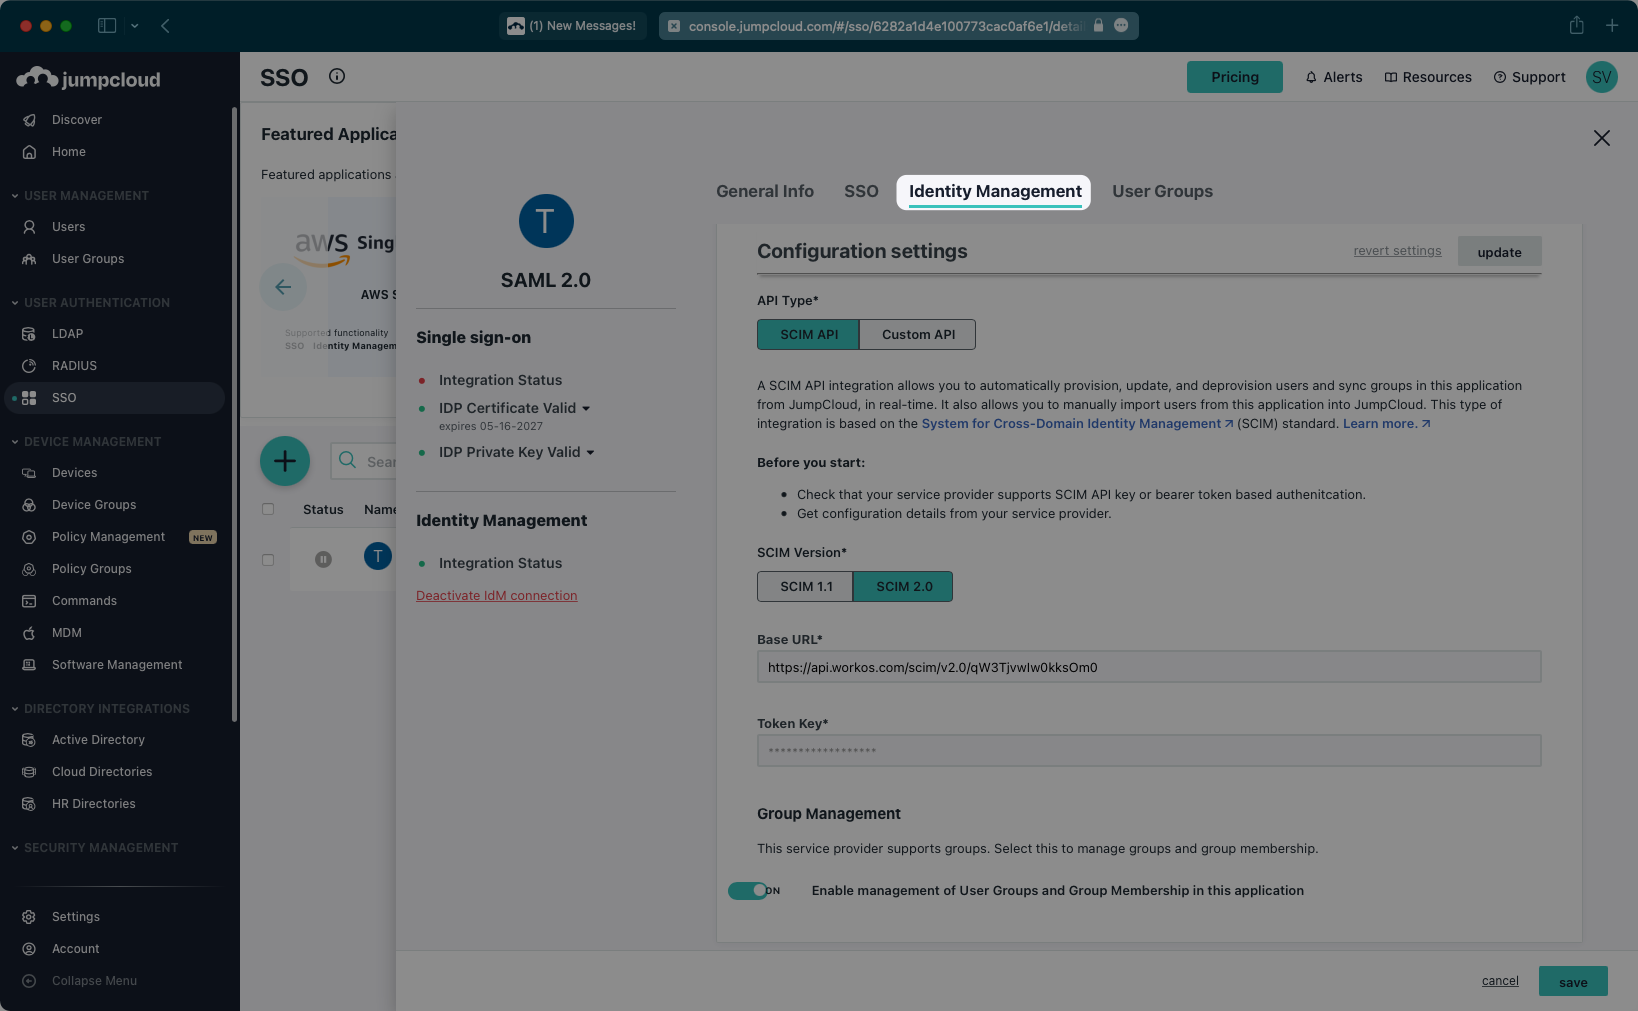 A screenshot highlighting the "SSO" tab and app selection in the JumpCloud admin dashboard.